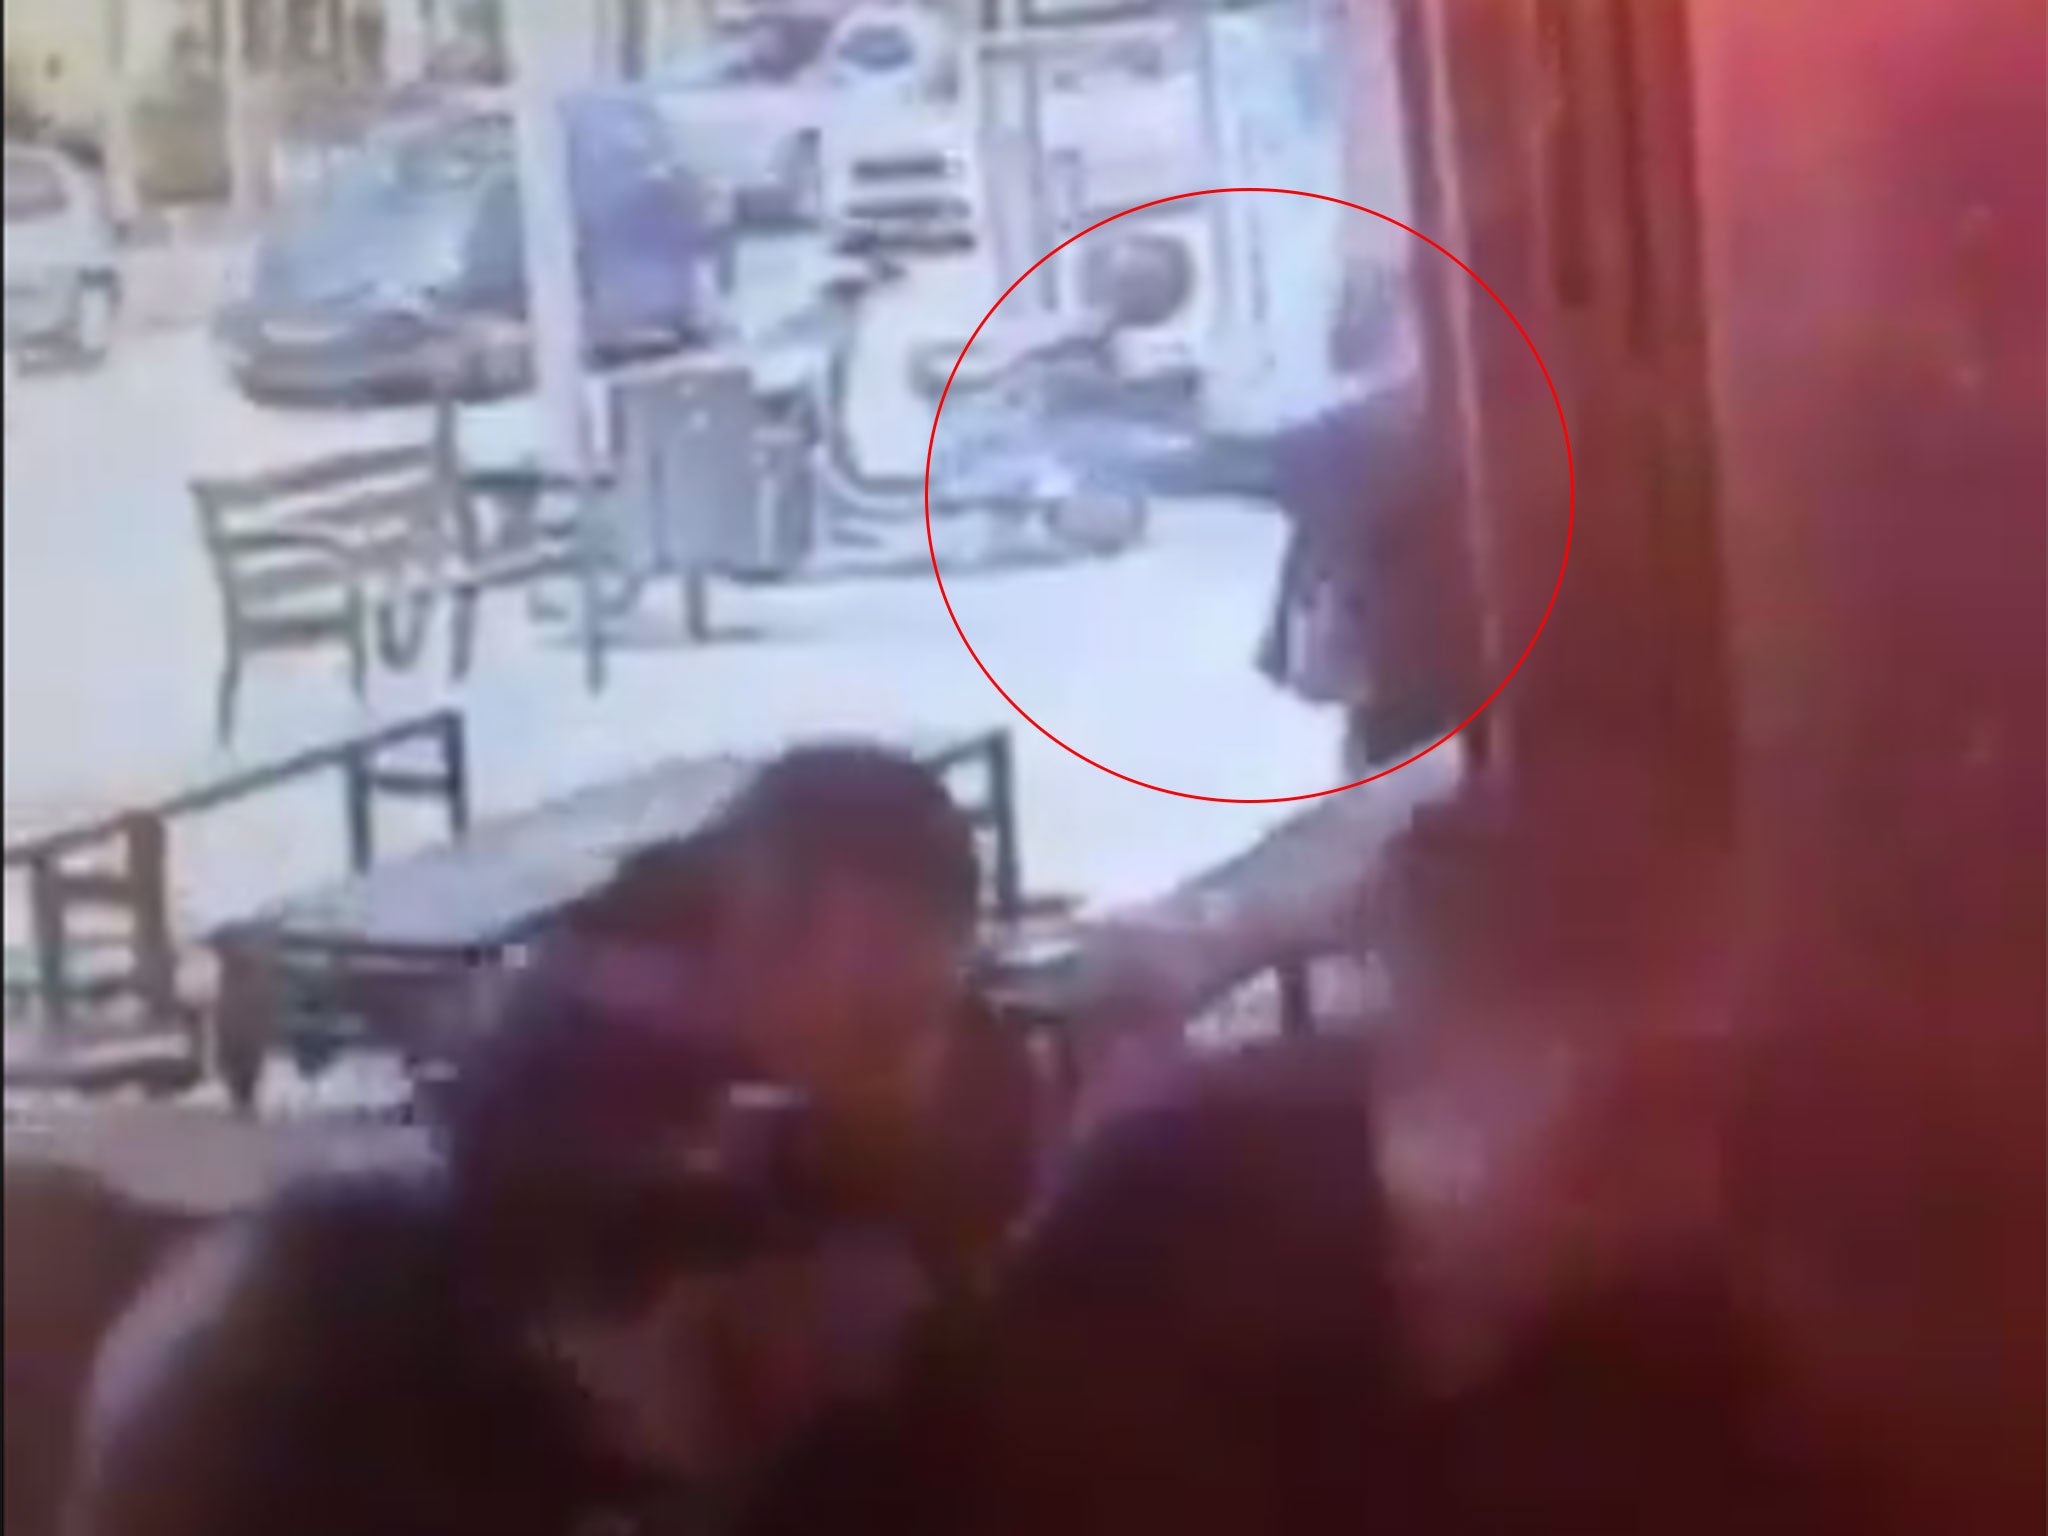 Still from CCTV footage purporting to show the Tel Aviv shooting